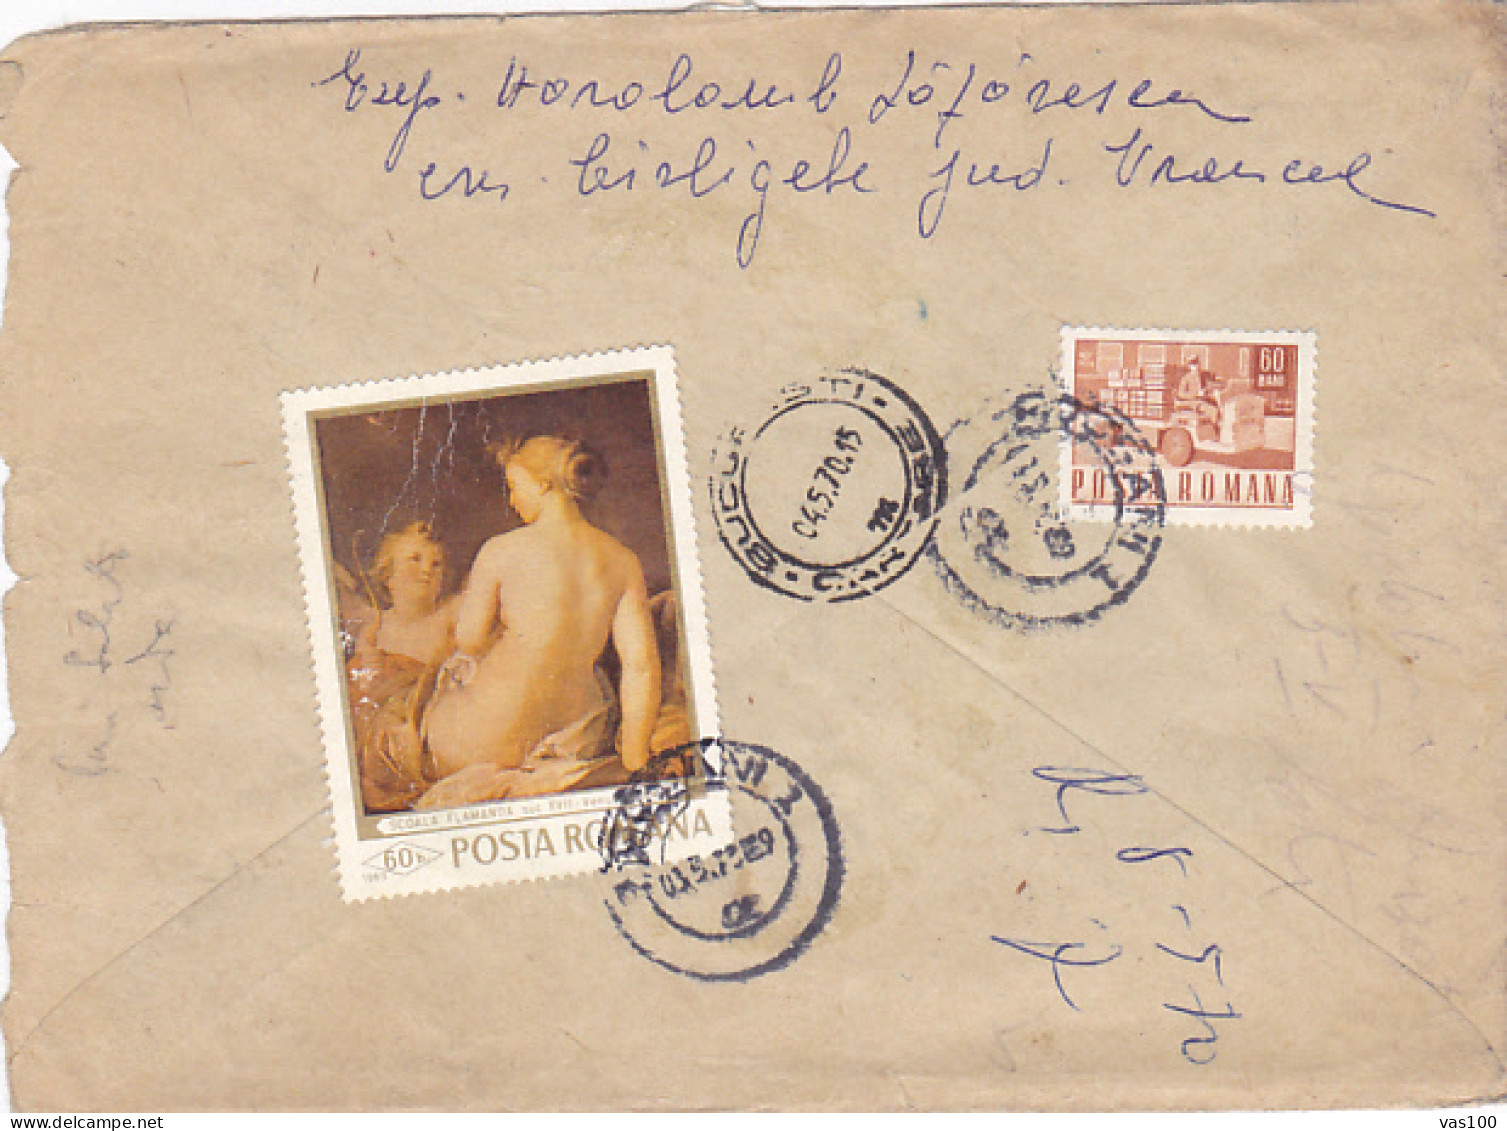 TRAIN, PLANE, POST, NUDE PAINTING, STAMPS ON REGISTERED COVER, 1970, ROMANIA - Briefe U. Dokumente